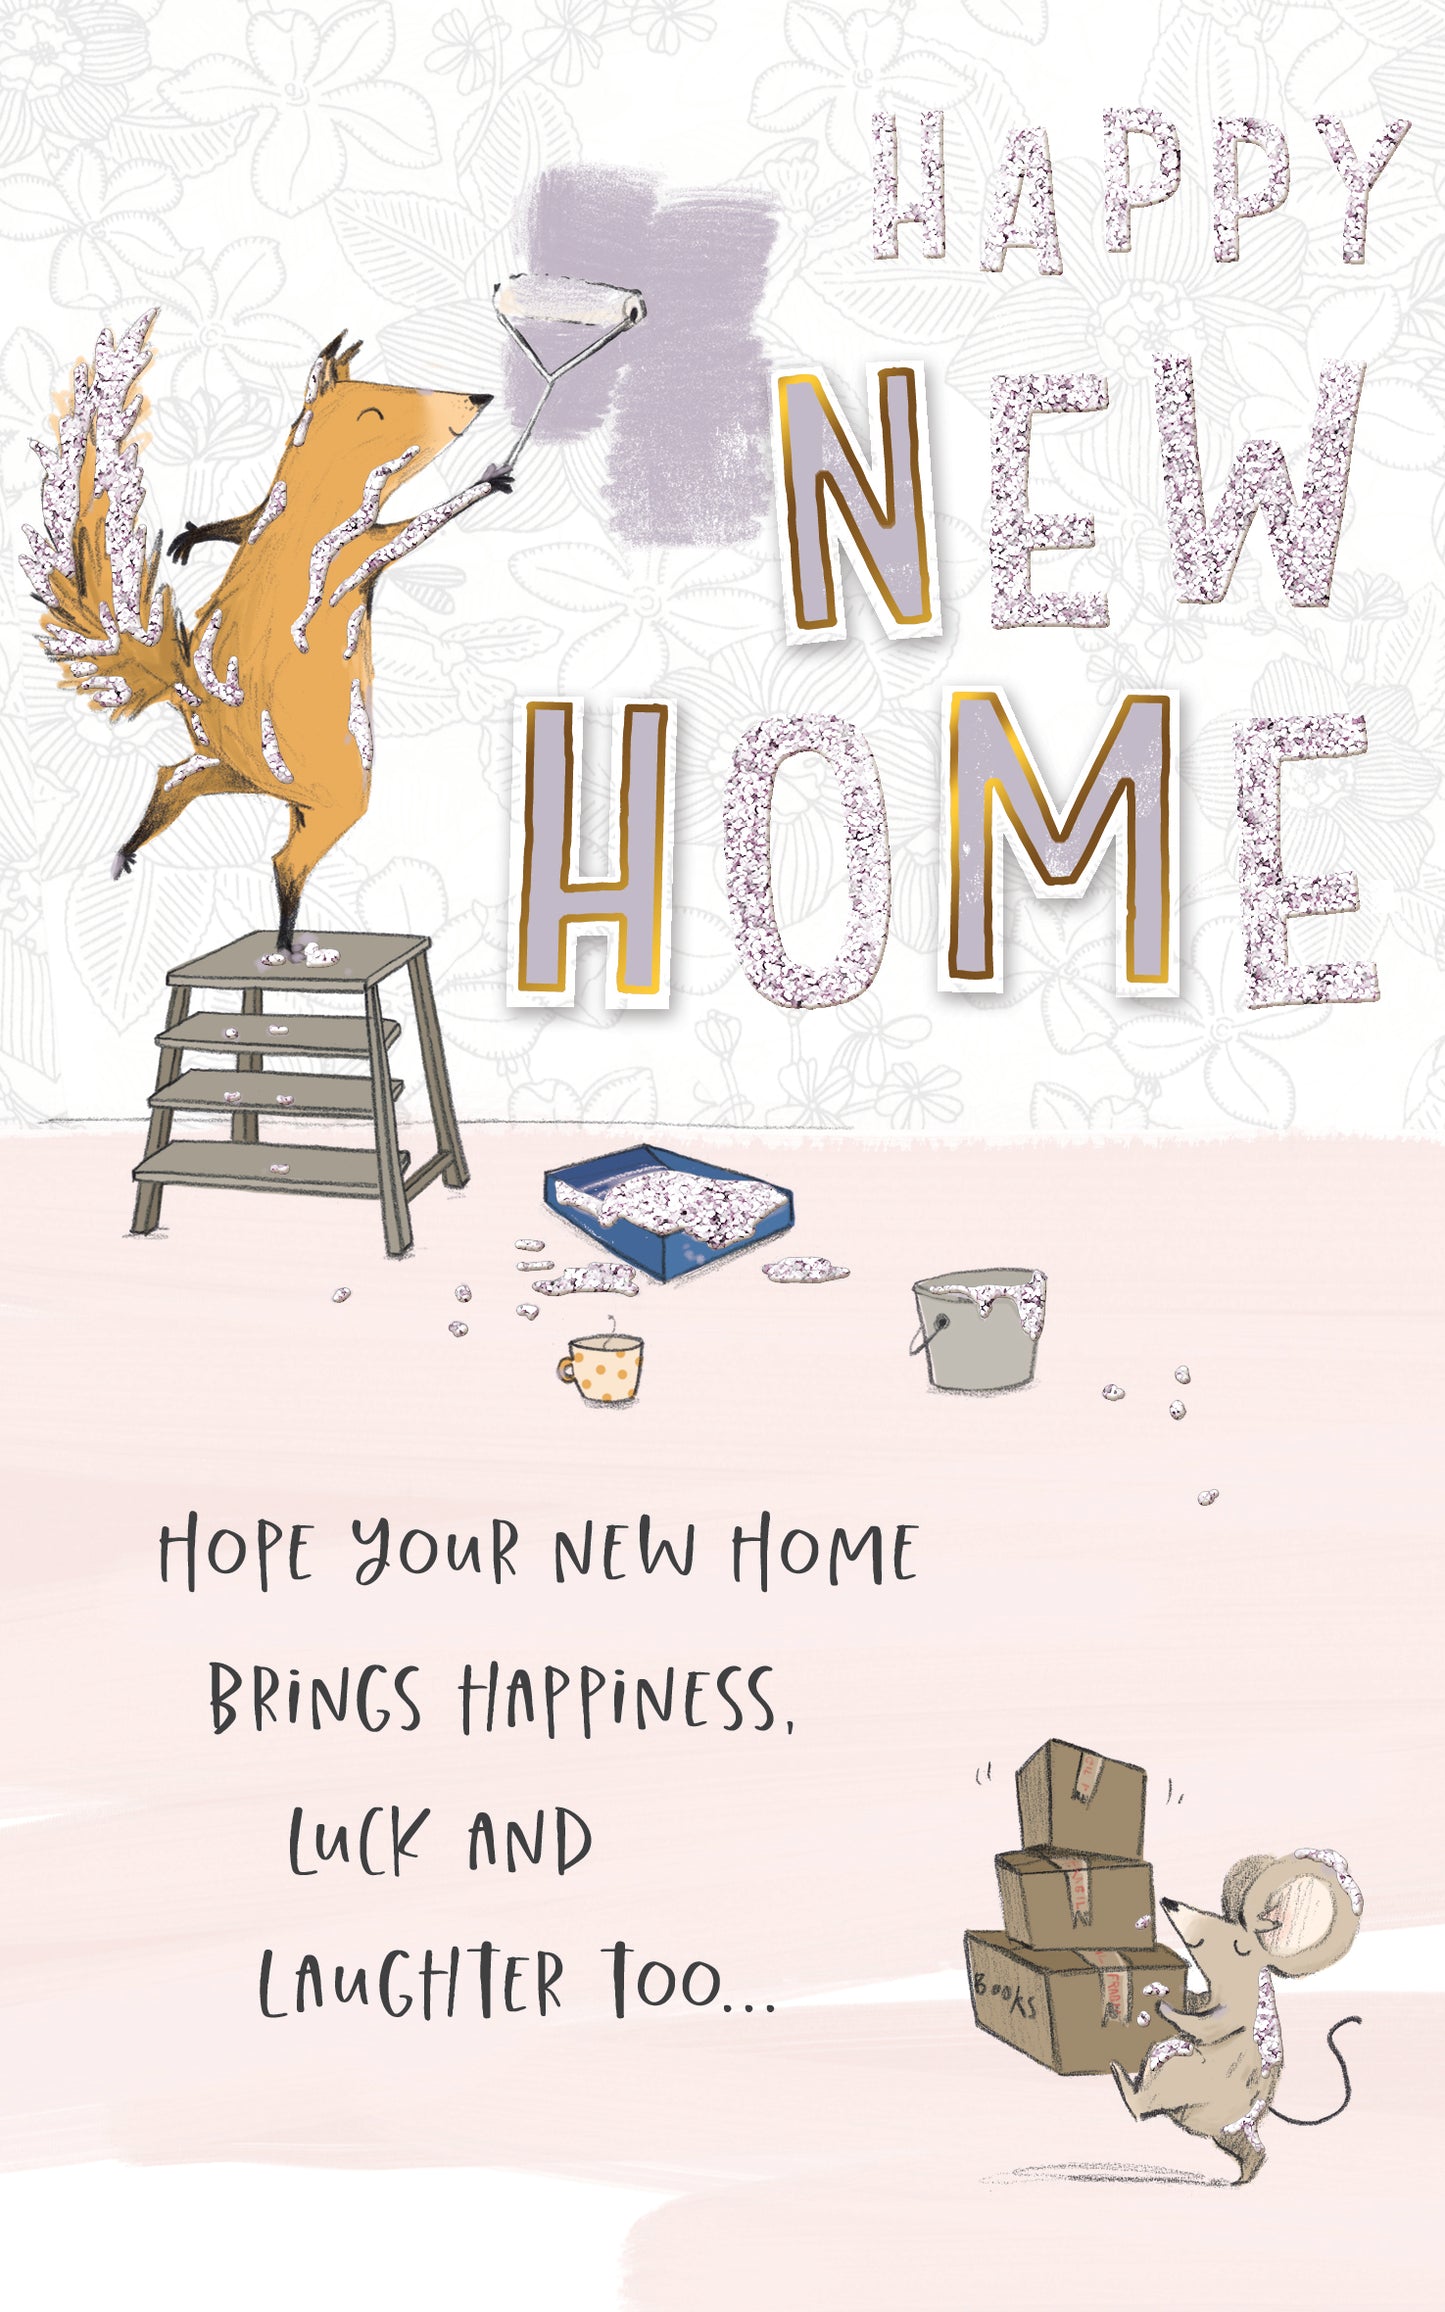 Happy New Home Embellished New Home Greeting Card